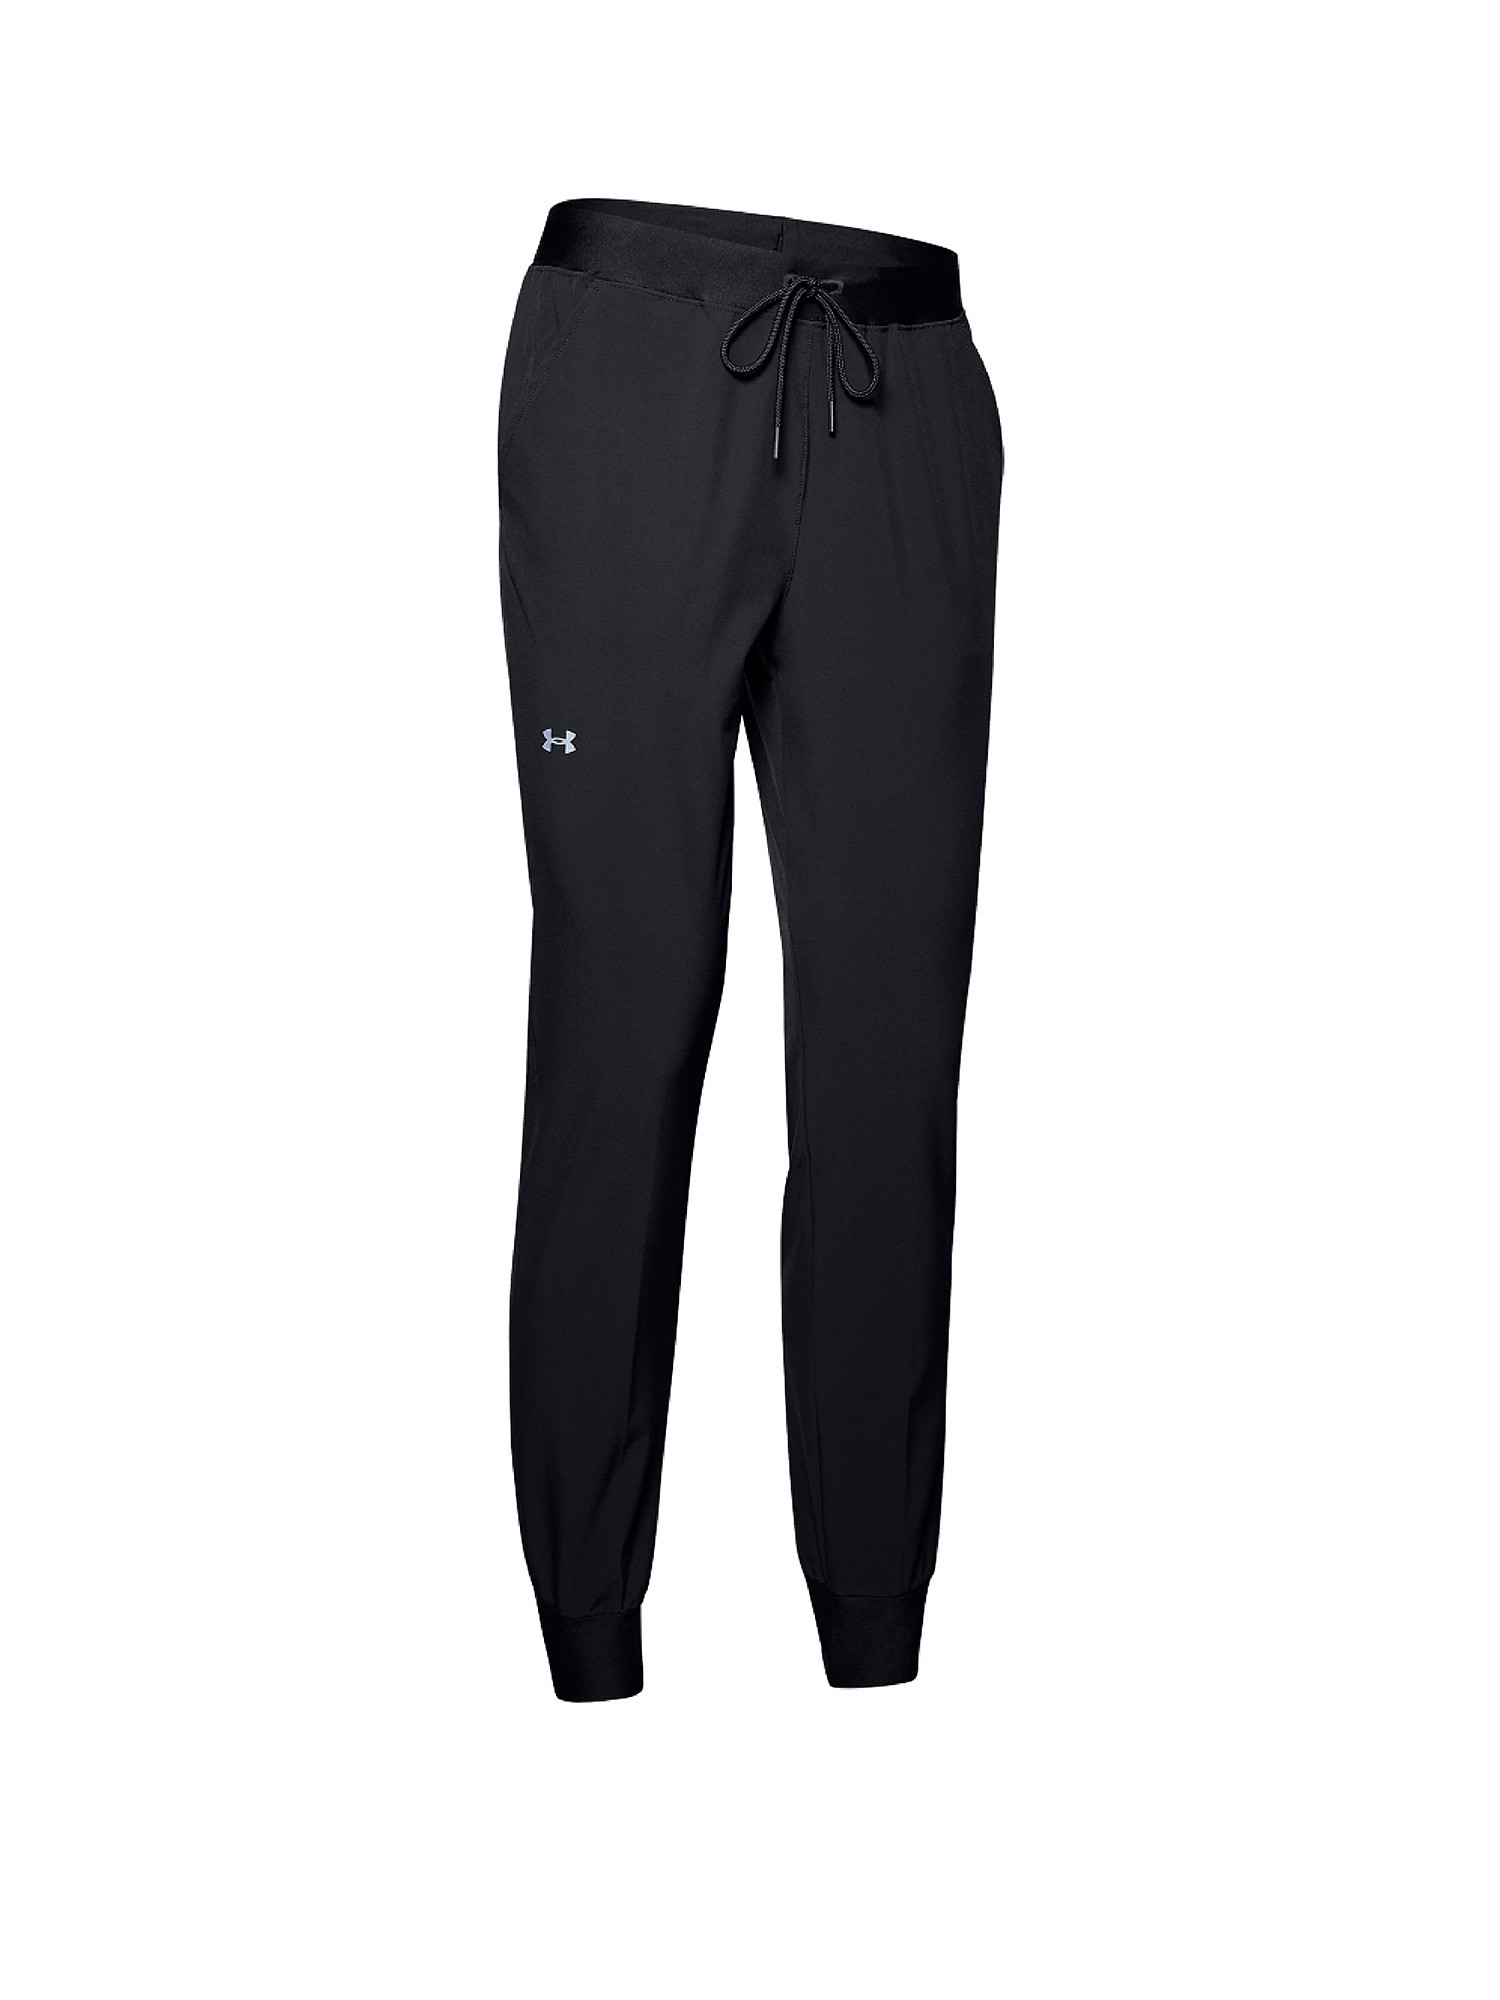 Under Armour - UA Armor Sport Woven Pants, Black, large image number 0